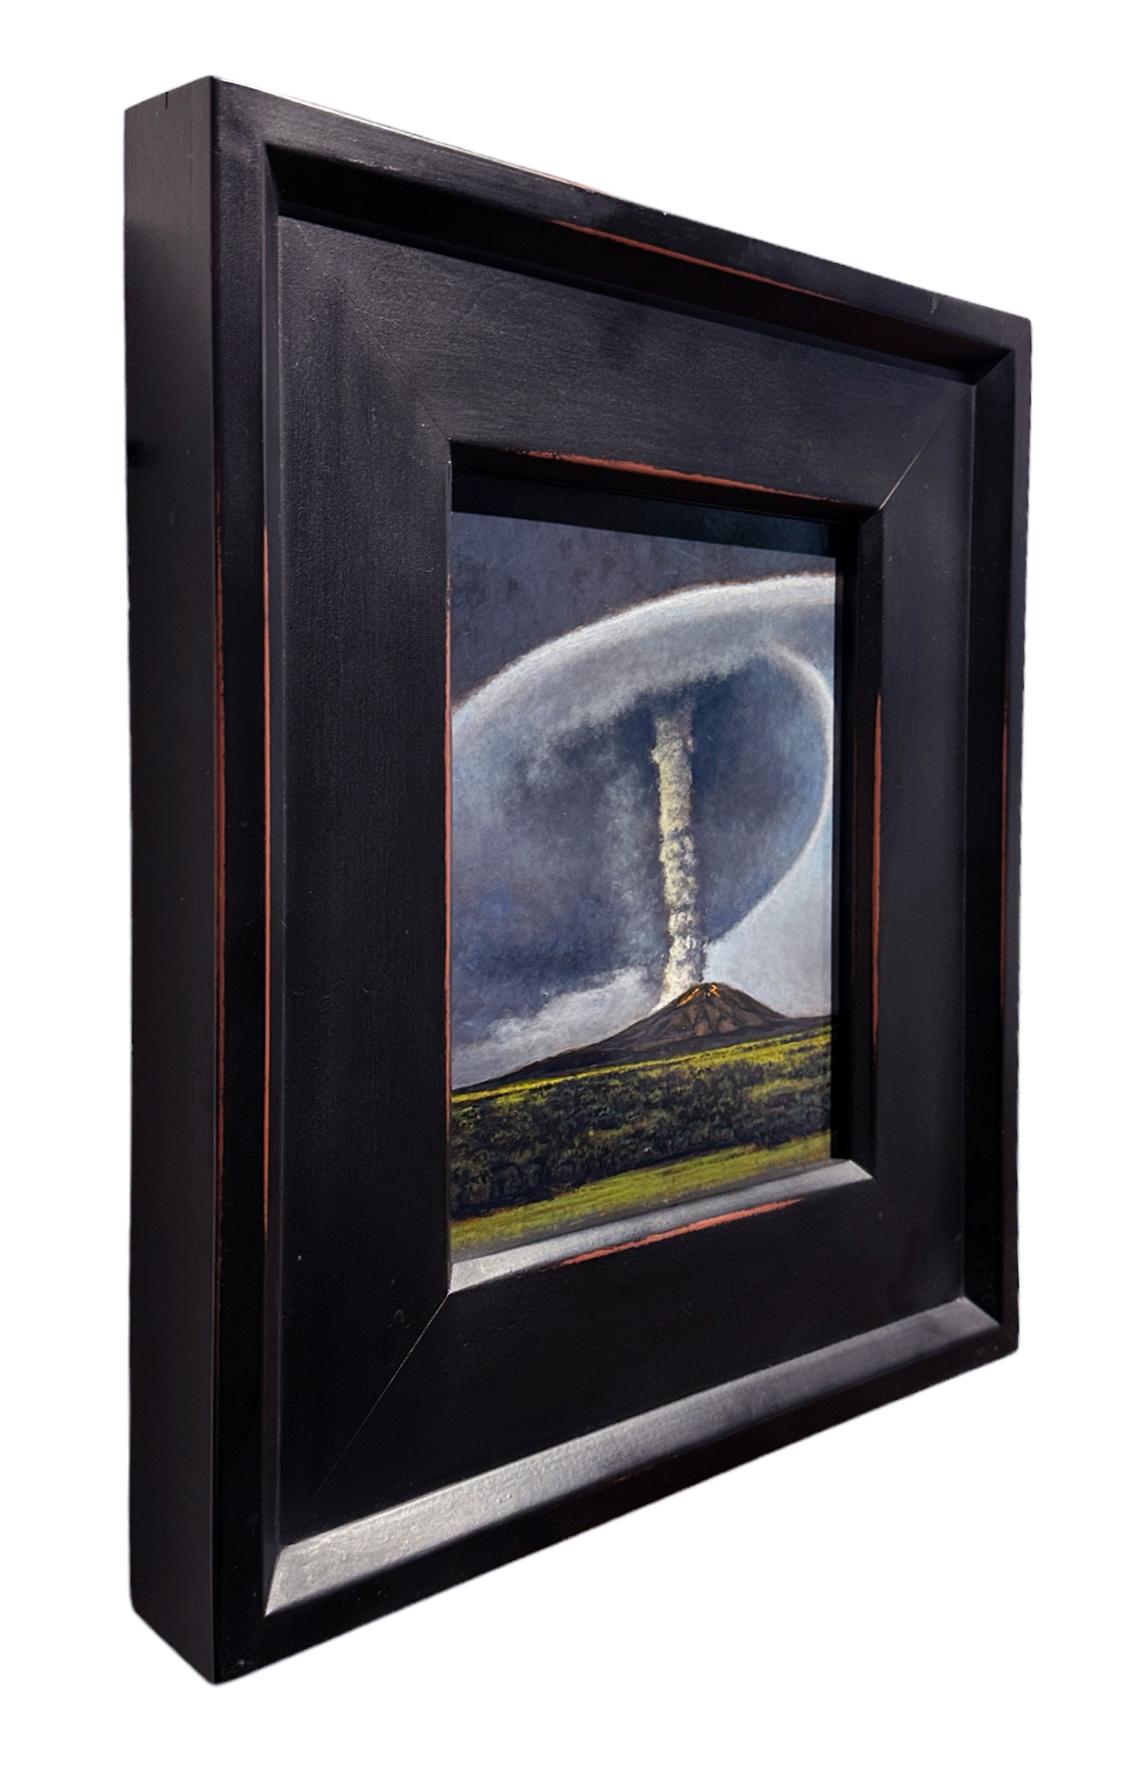 Volcano - Erupting Volcano with Swirling Cloud of Ash, Framed Oil Painting For Sale 1